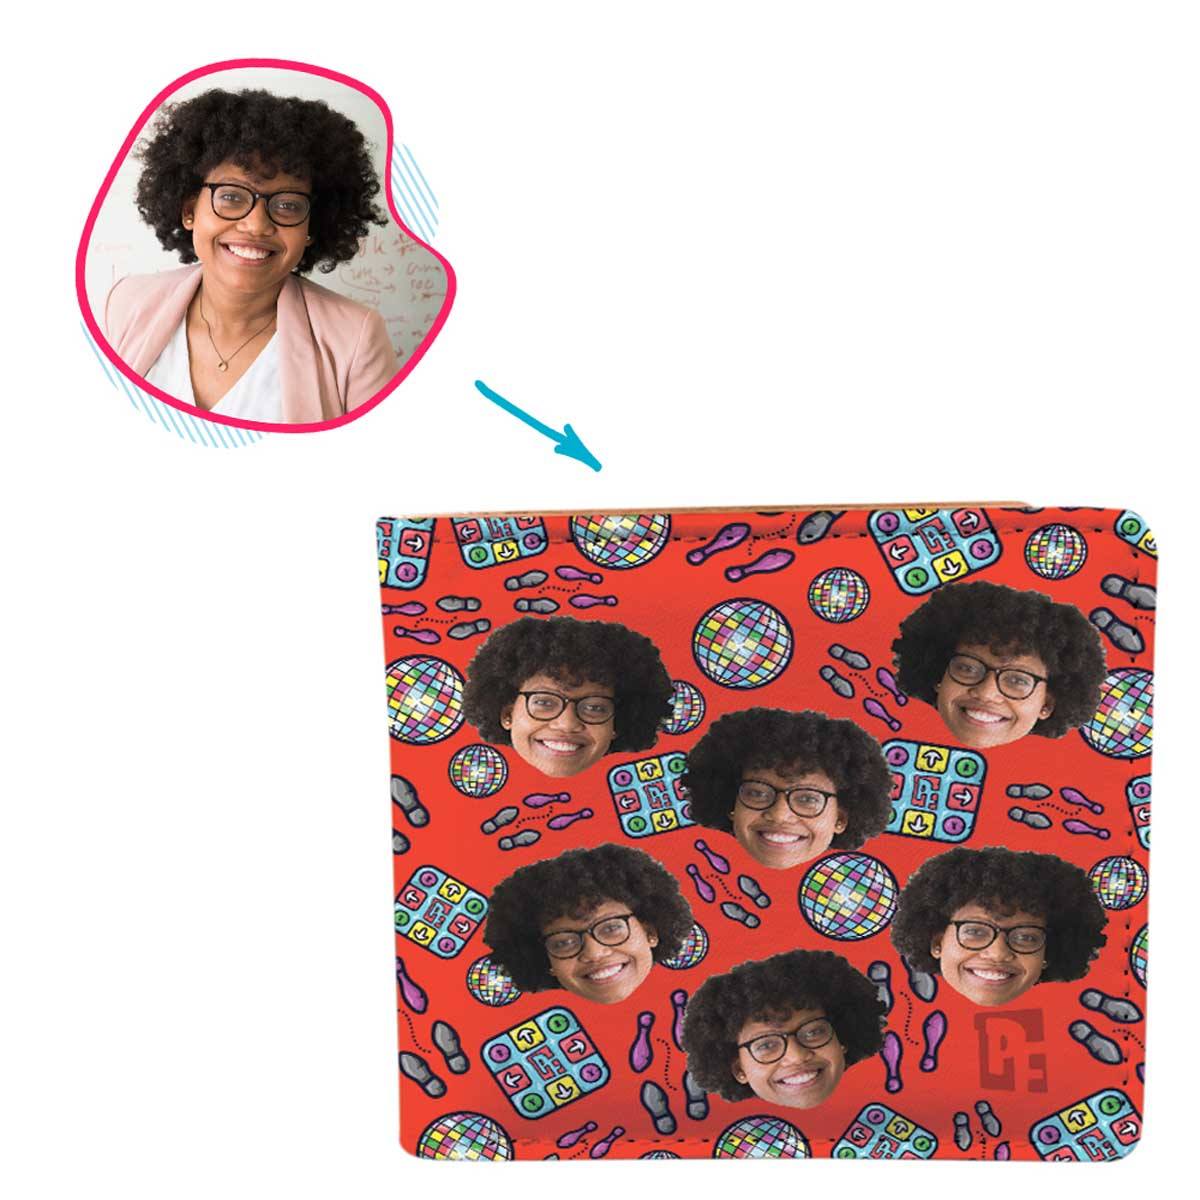 red Dancing wallet personalized with photo of face printed on it